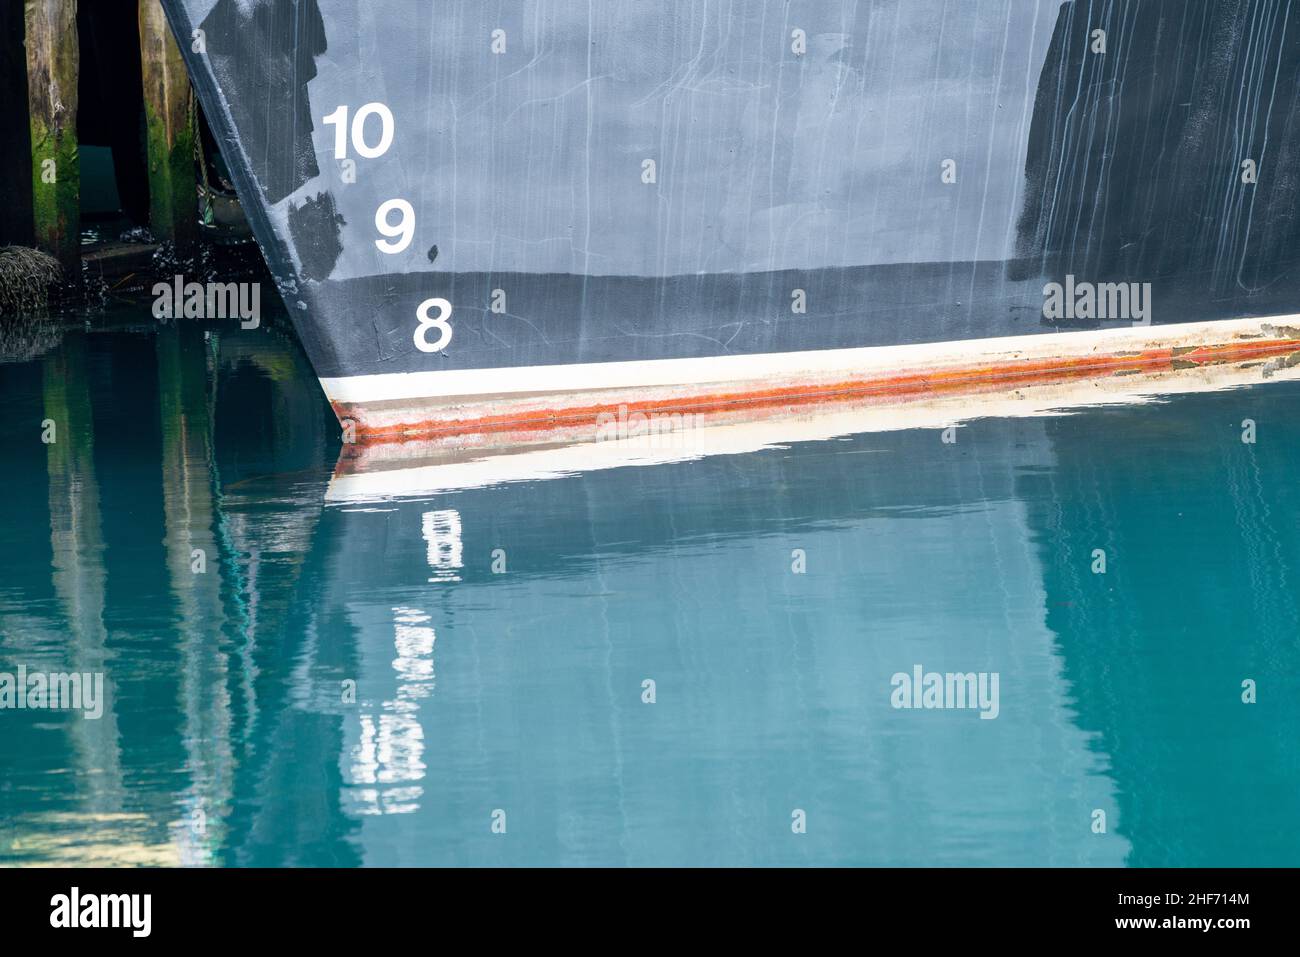 A navy blue ship with waterline marks painted white and red in color. The numbers are painted on the bottom of the boat numbers reflecting in water. Stock Photo